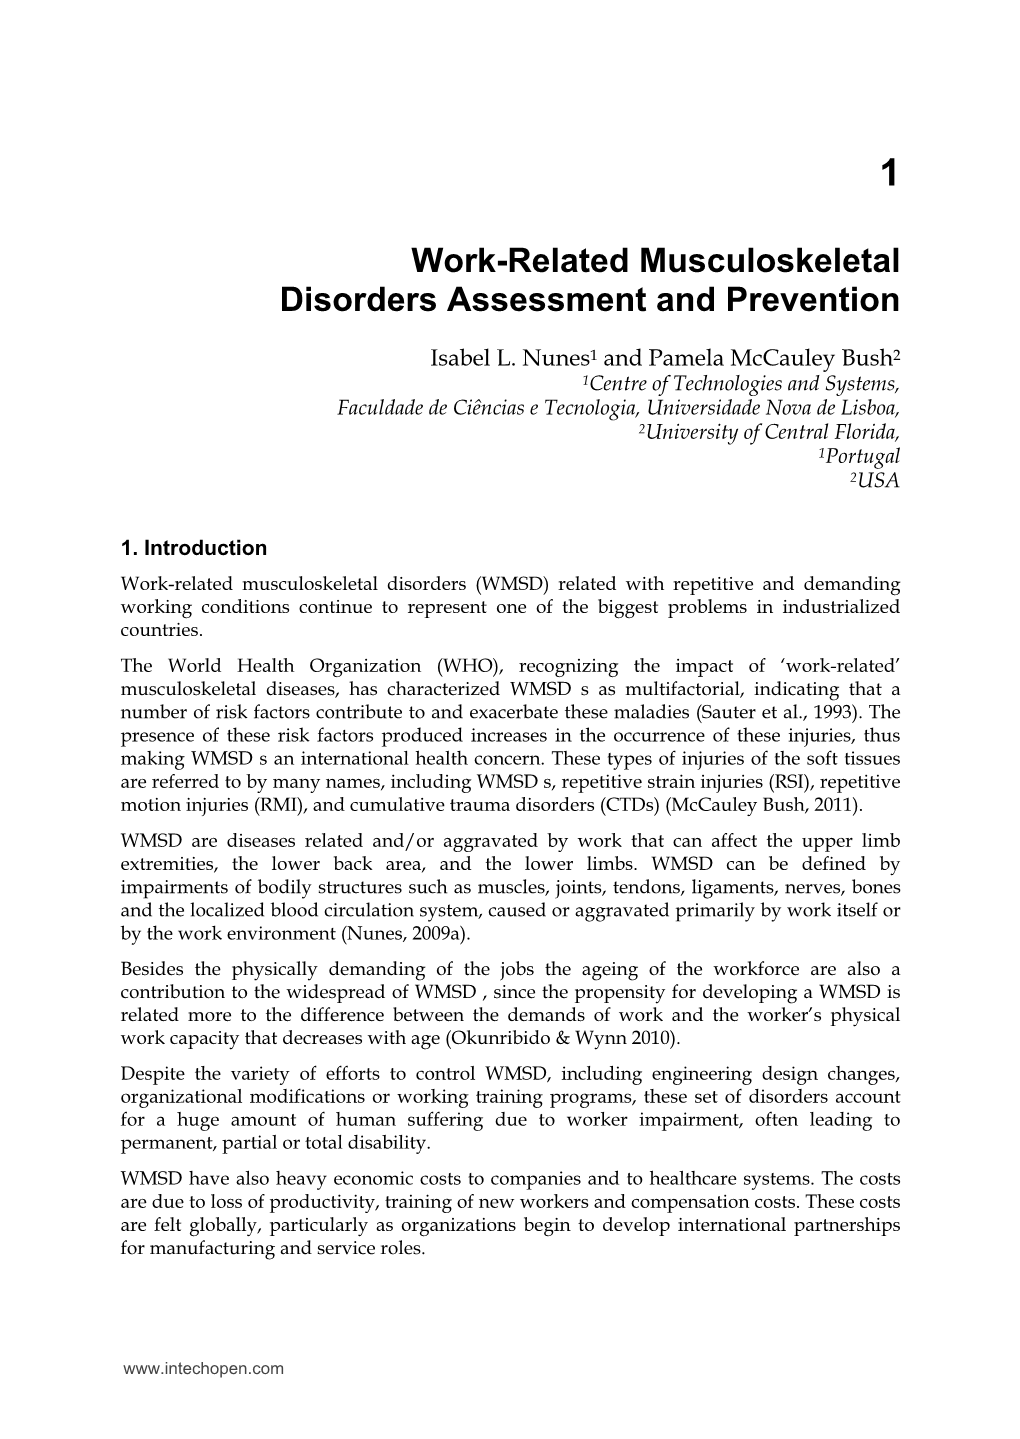 Work-Related Musculoskeletal Disorders Assessment and Prevention